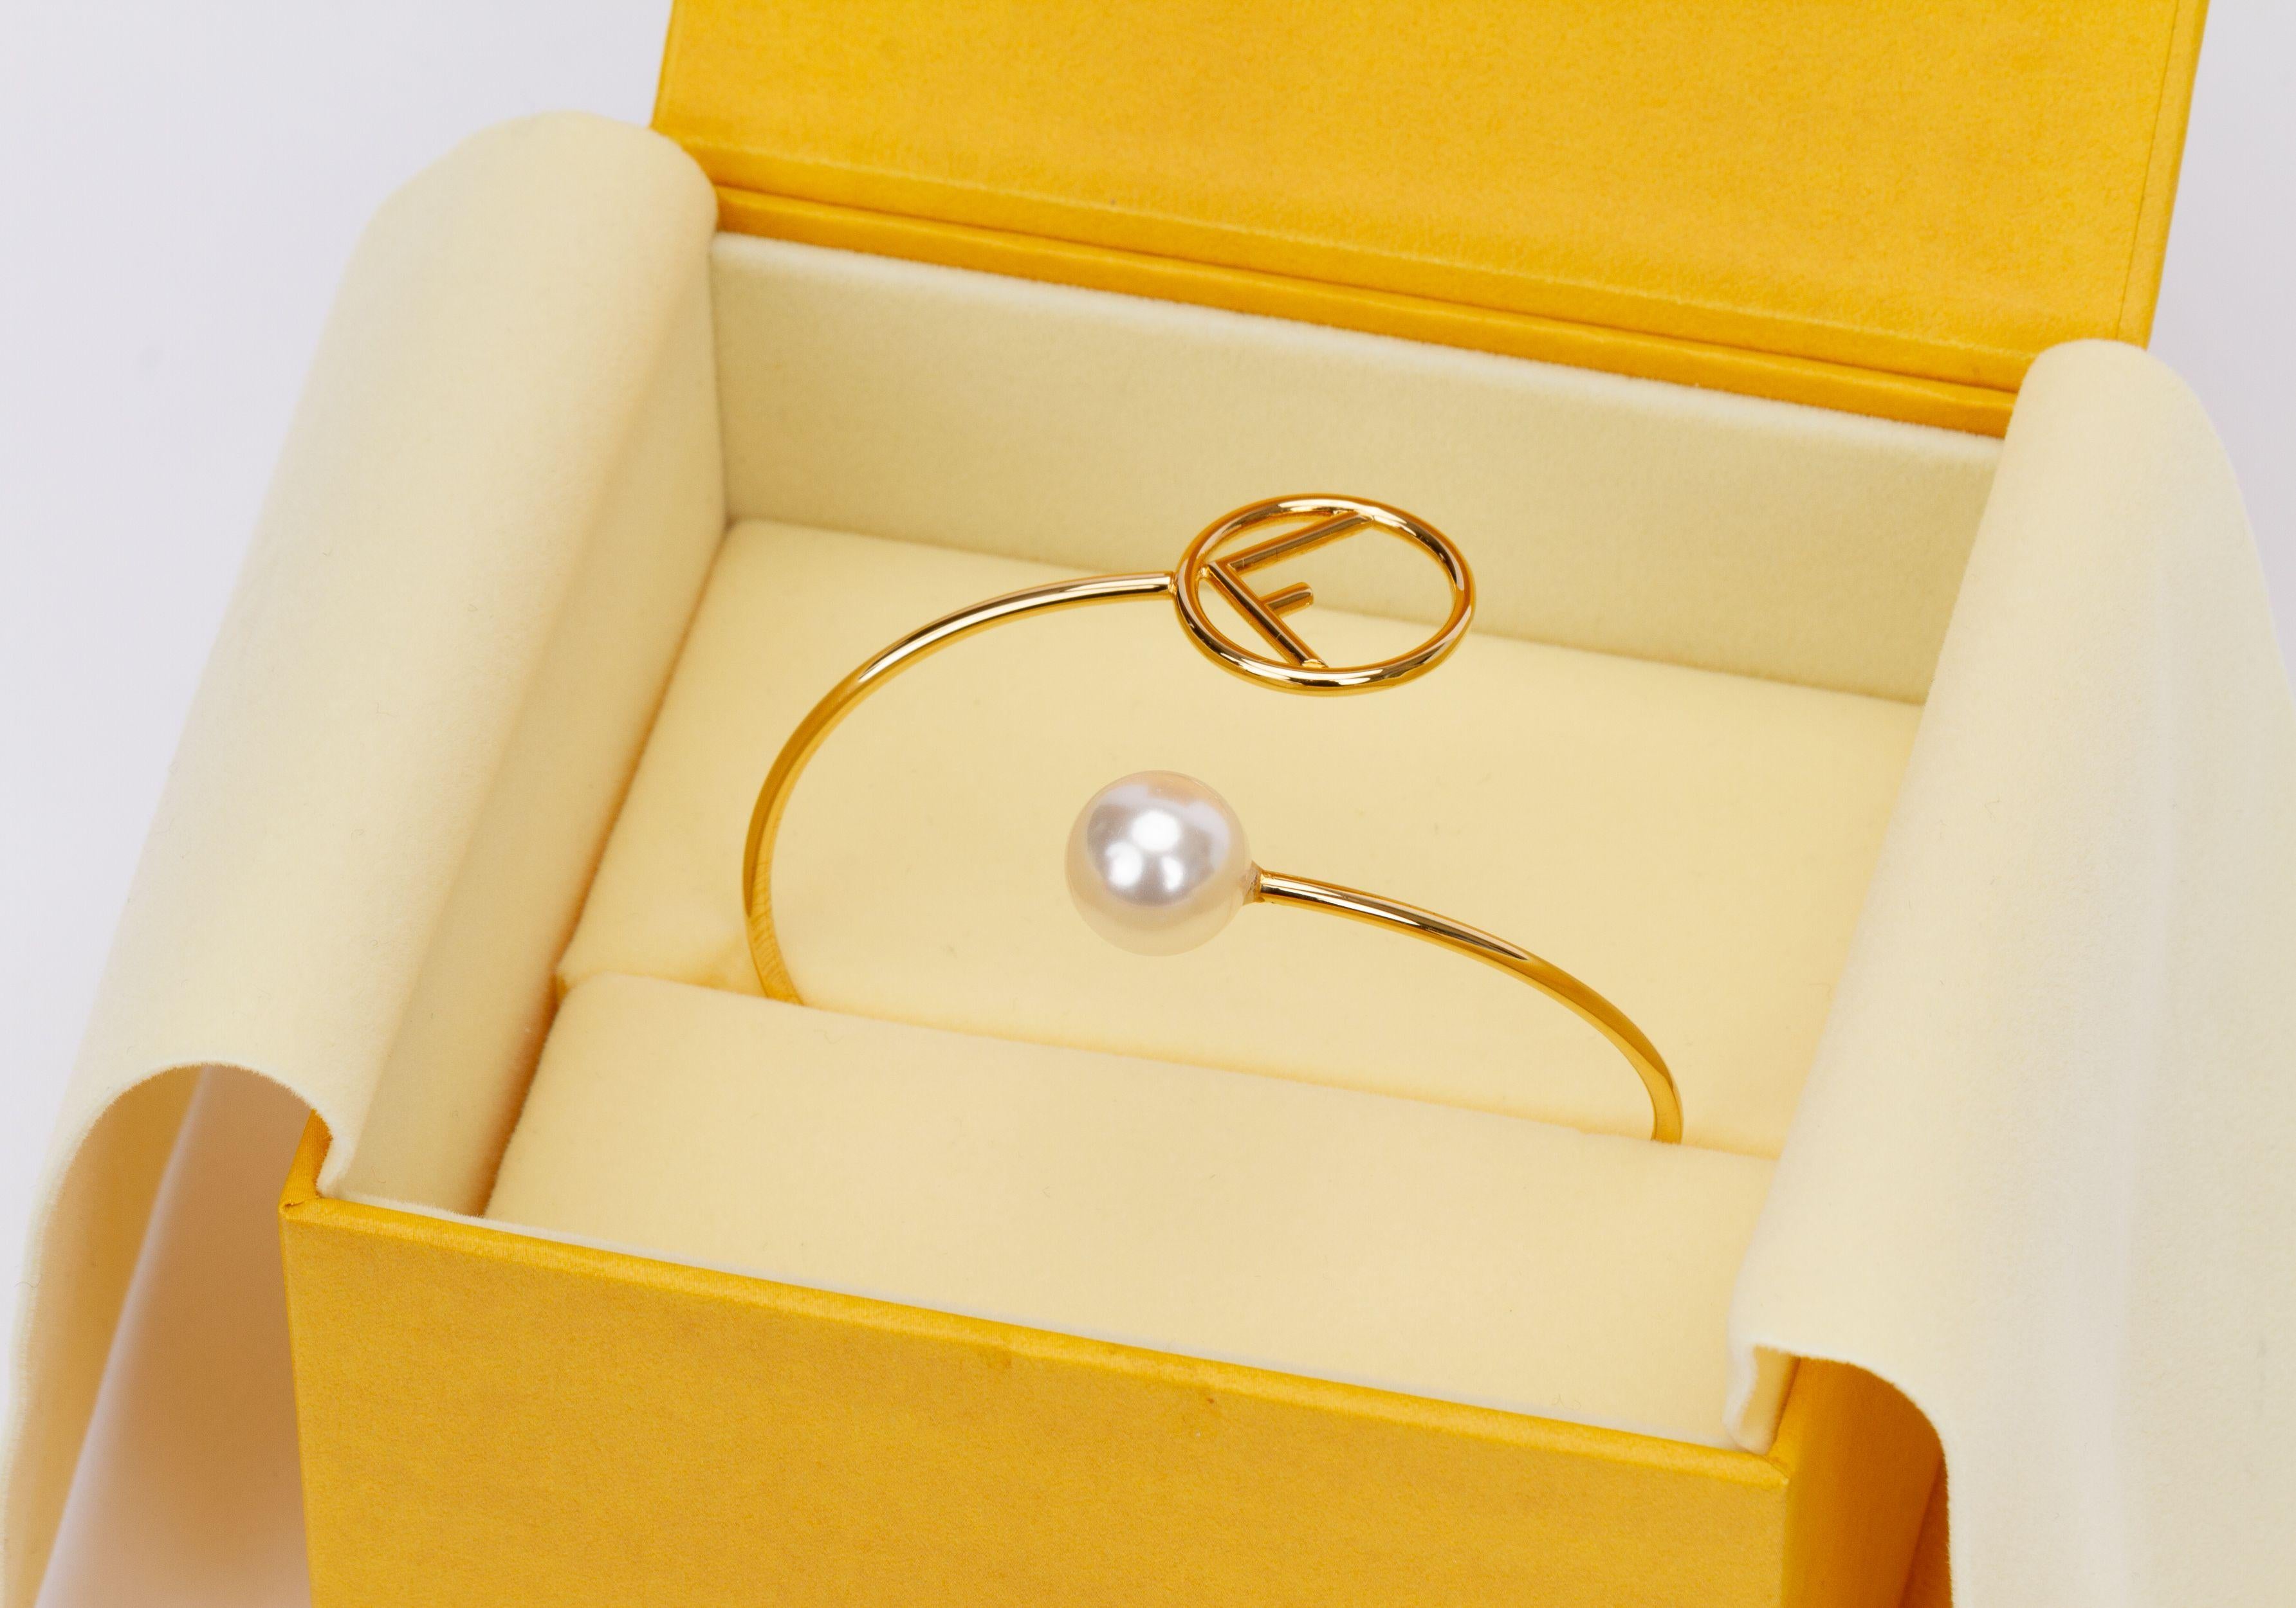 Fendi bracelet in gold. On one side the bracelet ends with a pearl and on the other side is singular F logo. It is new and comes with the original box.